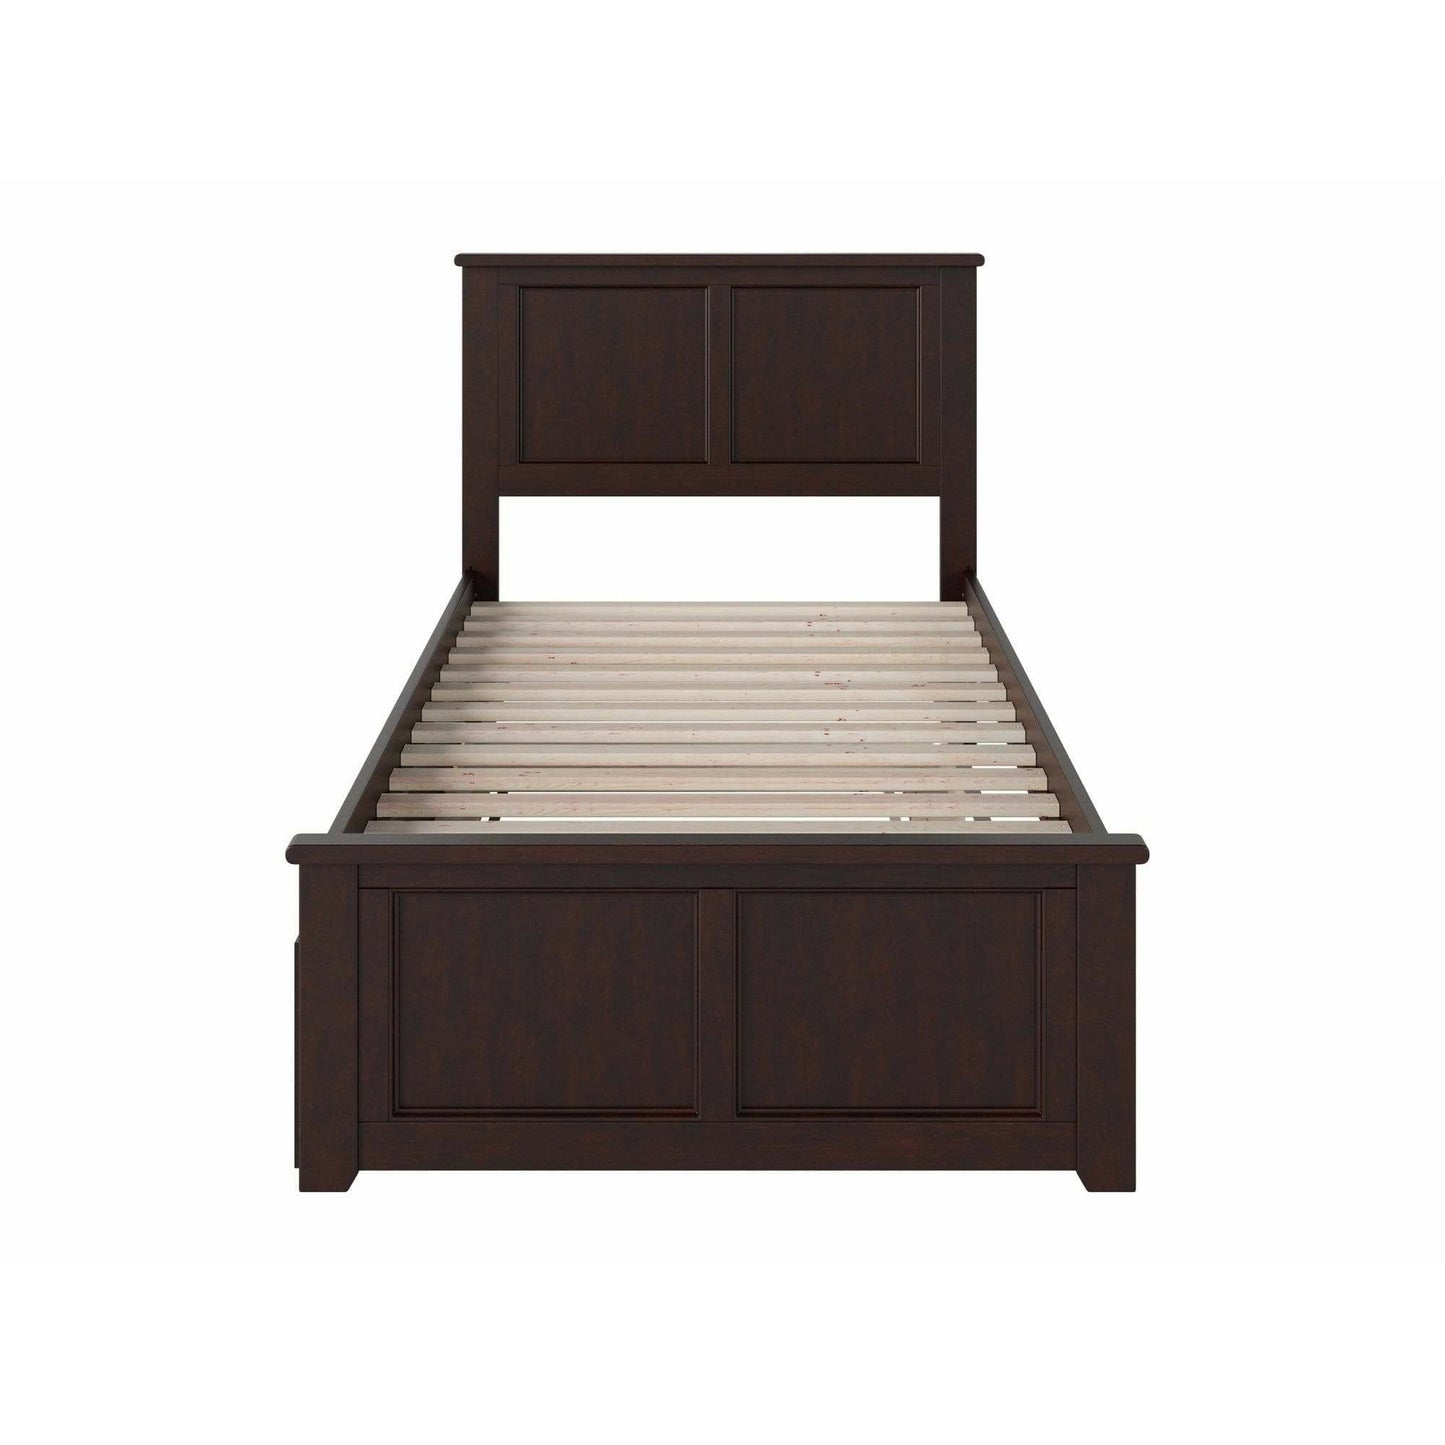 Atlantic Furniture Bed Madison Twin Platform Bed with Matching Foot Board with Twin Size Urban Trundle Bed in Espresso